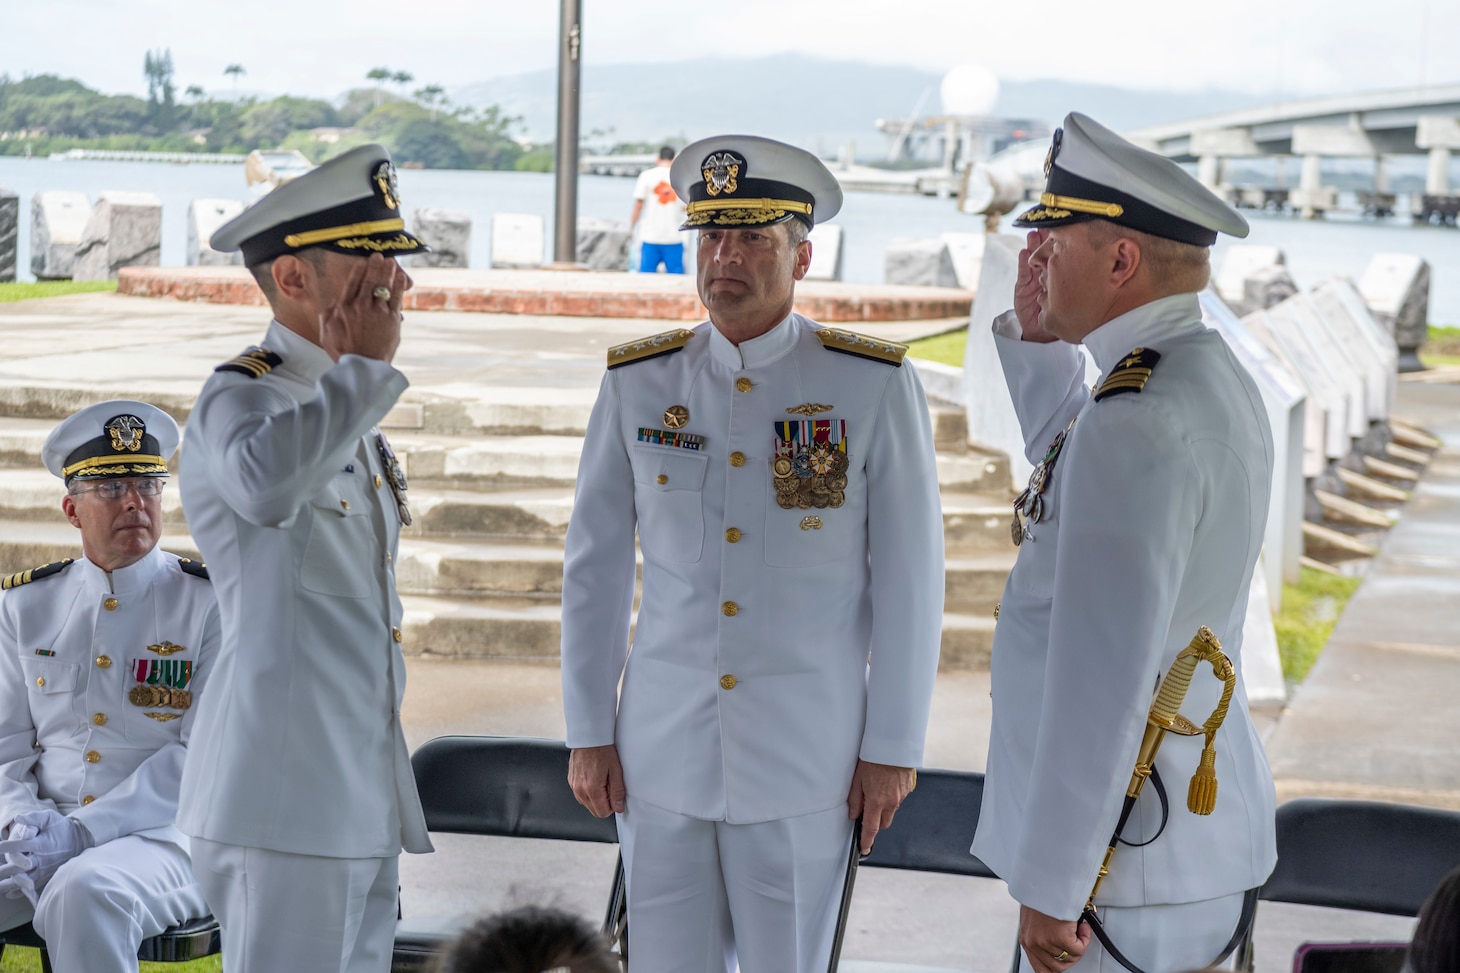 230303-N-EI510-0125 PEARL HARBOR, Hawaii (March 3, 2023) Cmdr. Andrew Lichtenstein, prospective commanding officer of Submarine Readiness Squadron 33 (SRS-33), left, relieves Cmdr. Robert Walls, commanding officer of SRS-33, as commanding officer during a change of command ceremony at the Pacific Fleet Submarine Museum, March 3, 2023.  Submarine Readiness Squadron 33 provides operational support for Pearl Harbor homeported submarines, their crews, families, and the staffs of Submarine Squadrons 1 and 7. (U.S. Navy photo by Mass Communication Specialist 1st Class Scott Barnes)